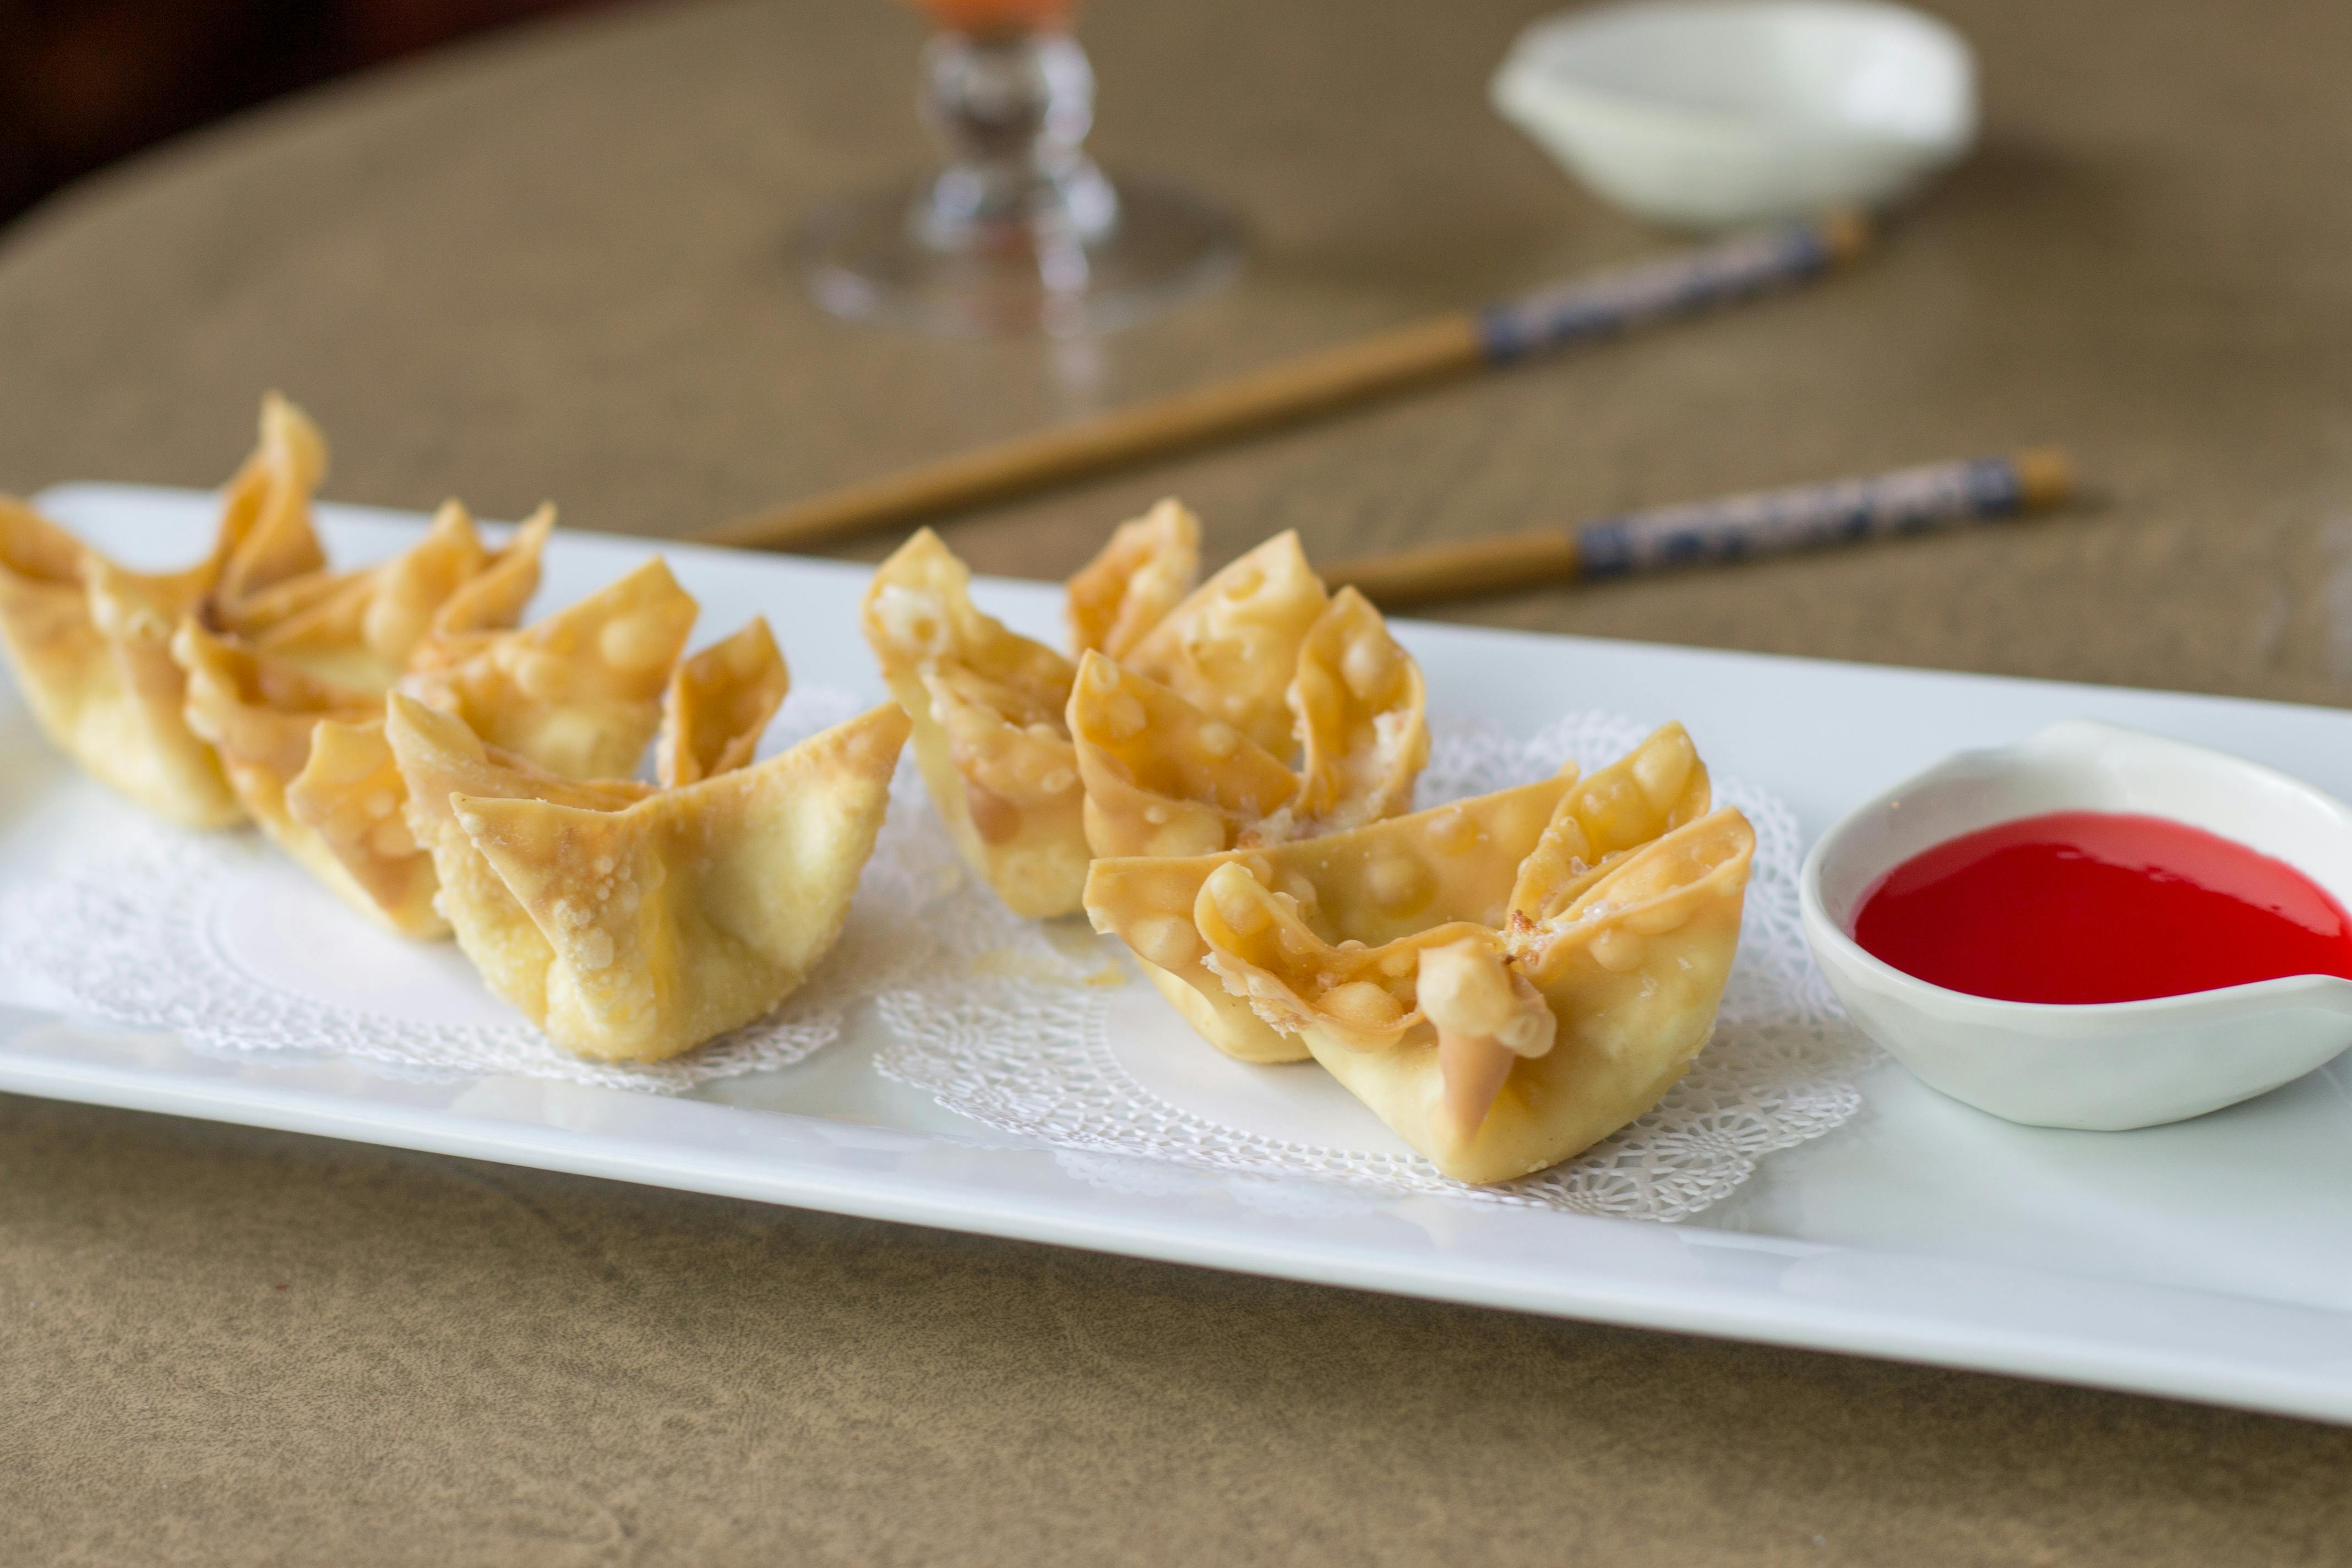 A16. Crab Rangoon (6) from Sushi Pirate in La Crosse, WI